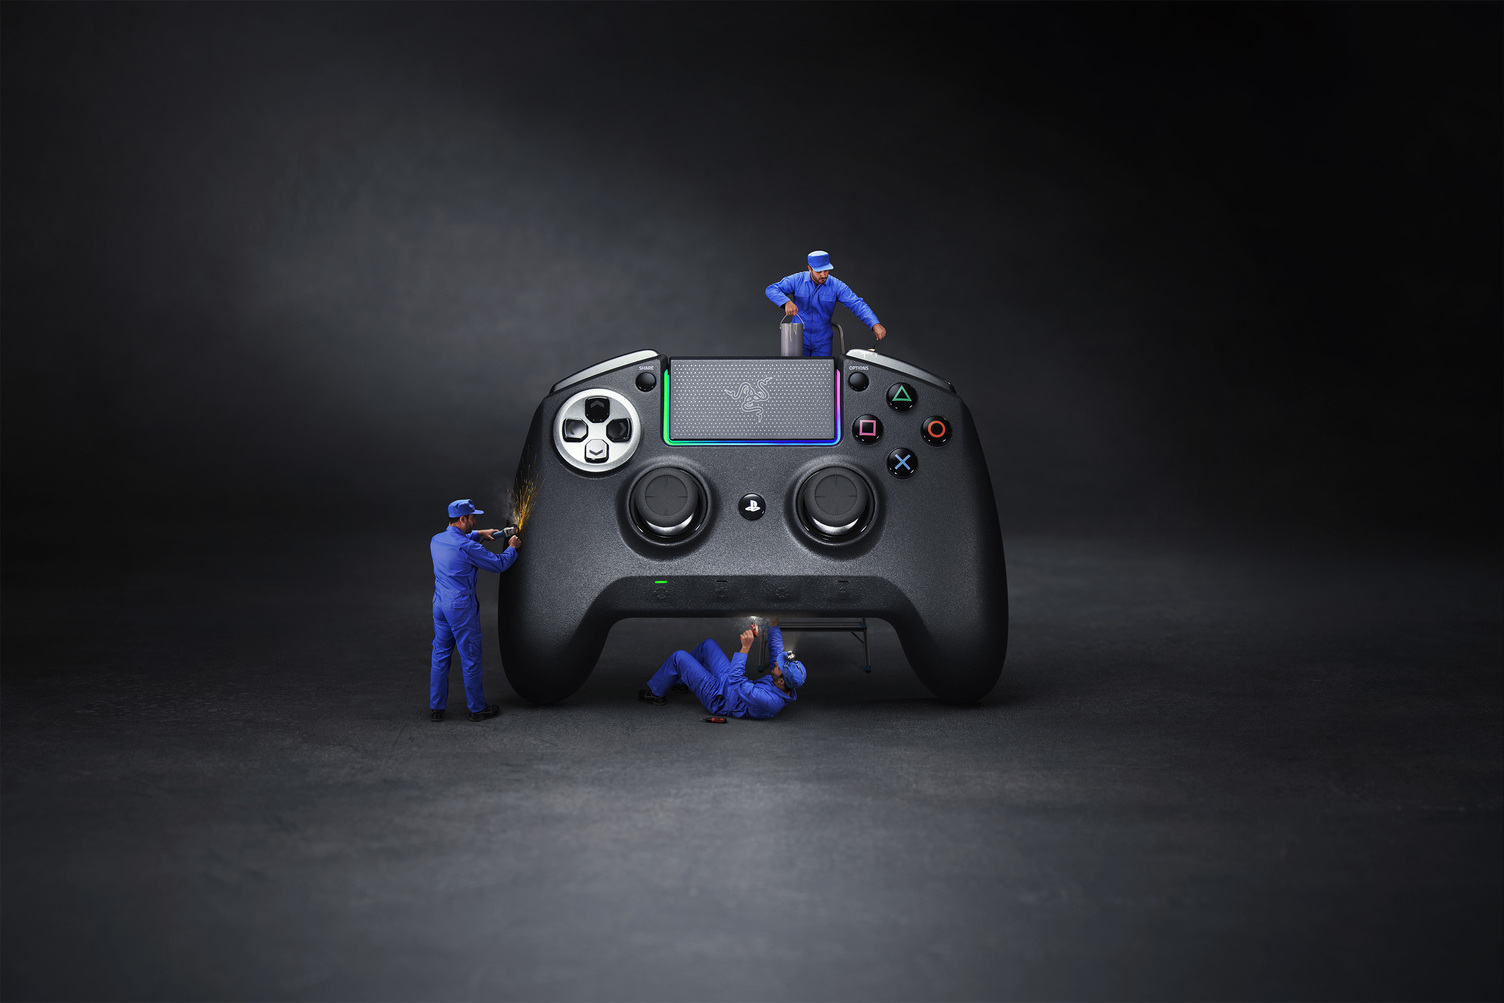 Imposible Dictar Pericia Razer announces new Raiju controllers and Thresher headset for PS4 - GAMING  TREND